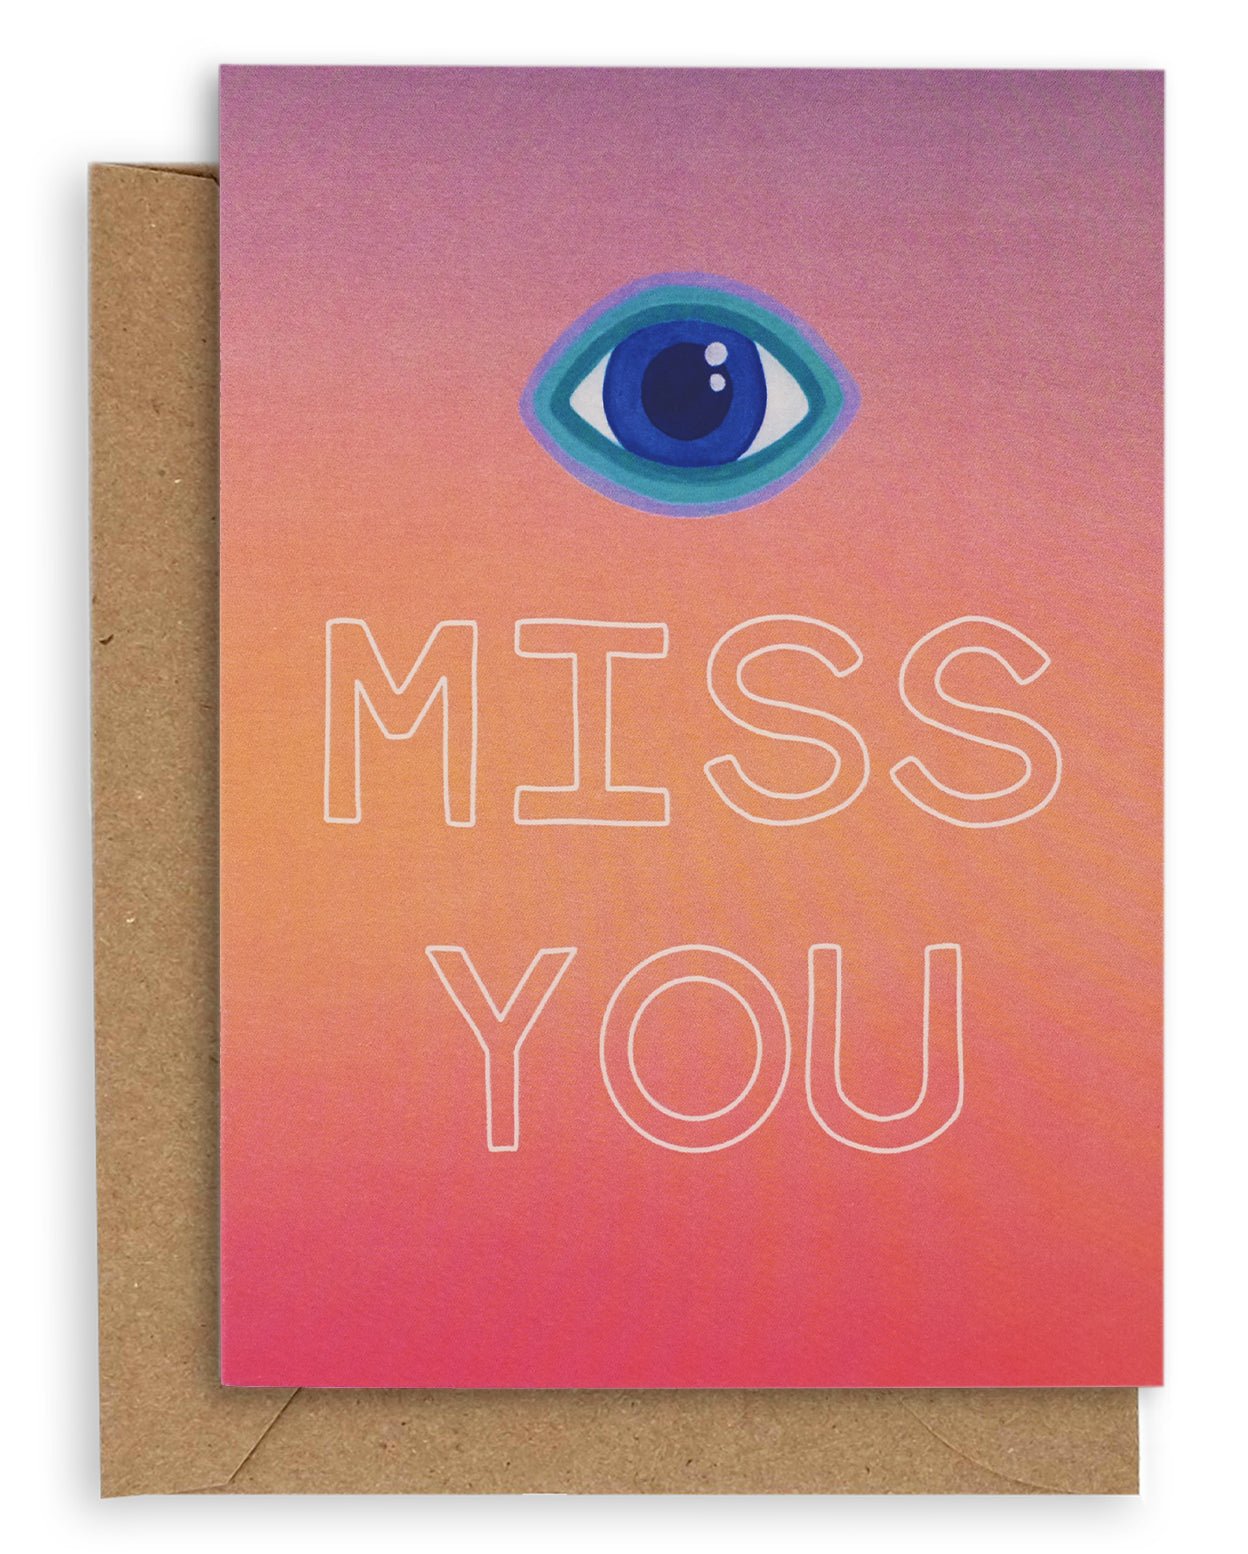 Greeting card with the symbol of an eye followed by the words &quot;Miss You&quot; in white hollow font on a gradient purple, orange and red background. Shown with brown kraft paper envelope.